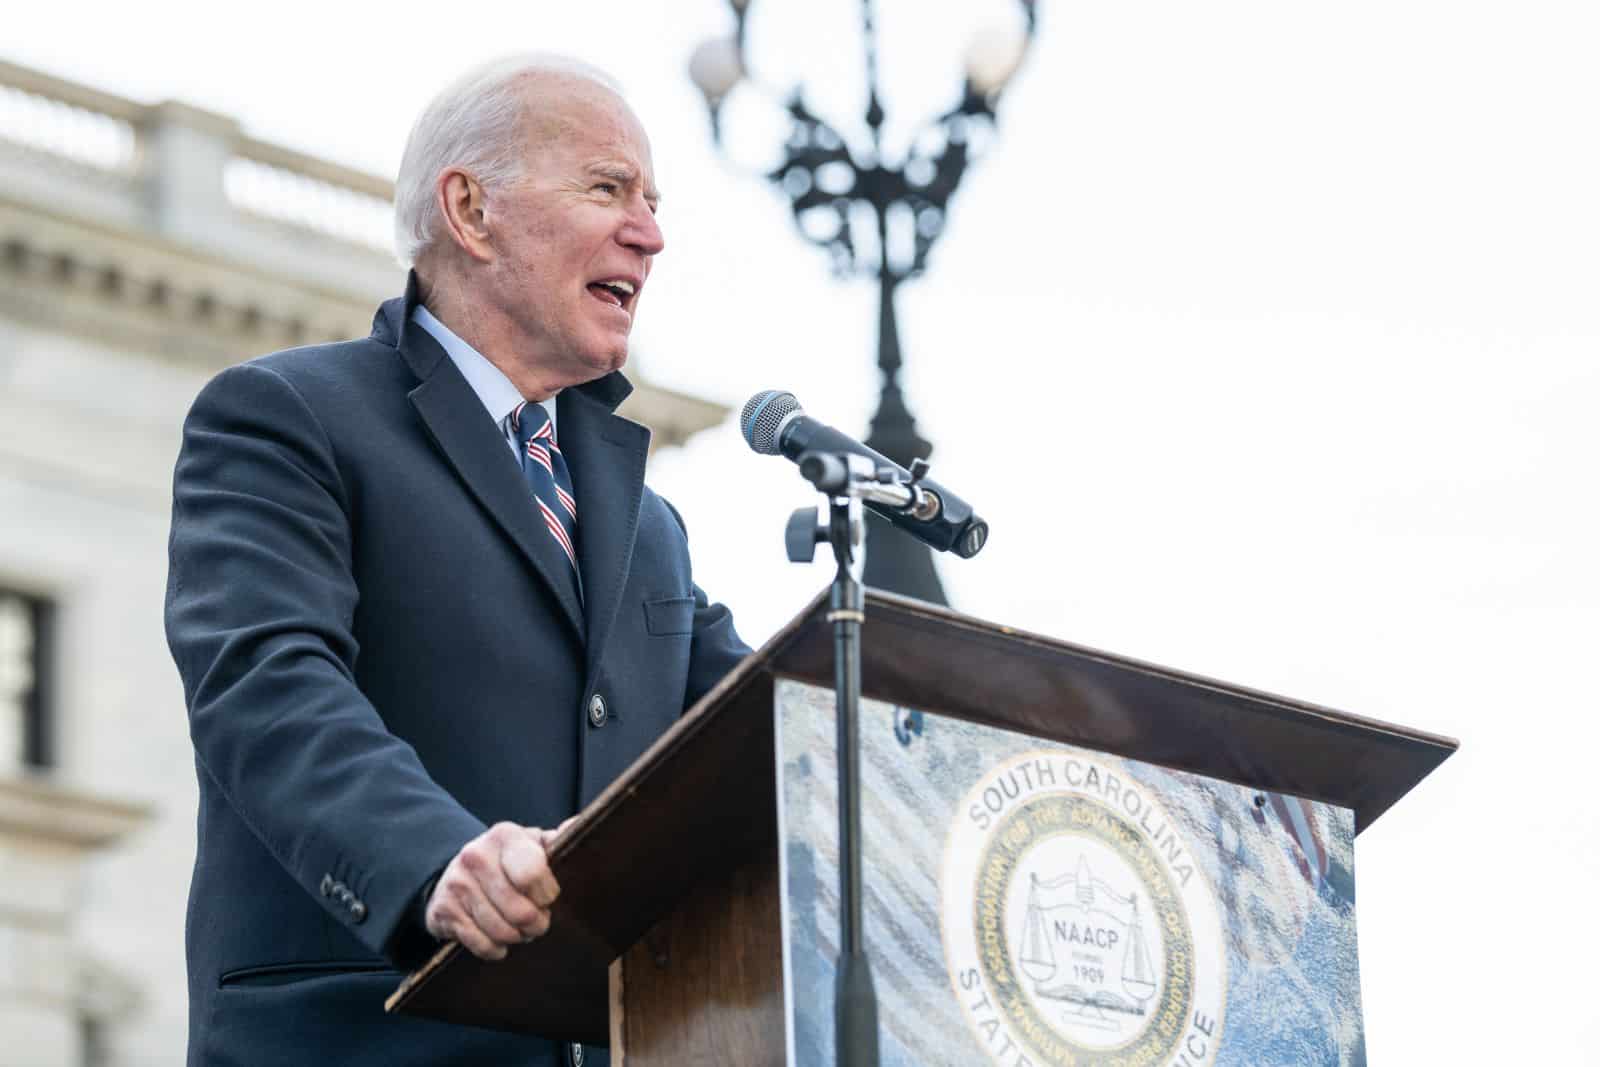 Image Credit: Shutterstock / Crush Rush <p><span>Biden proposed a rule to shorten the wait time for asylum seekers to apply for work authorization from one year to six months.</span></p>